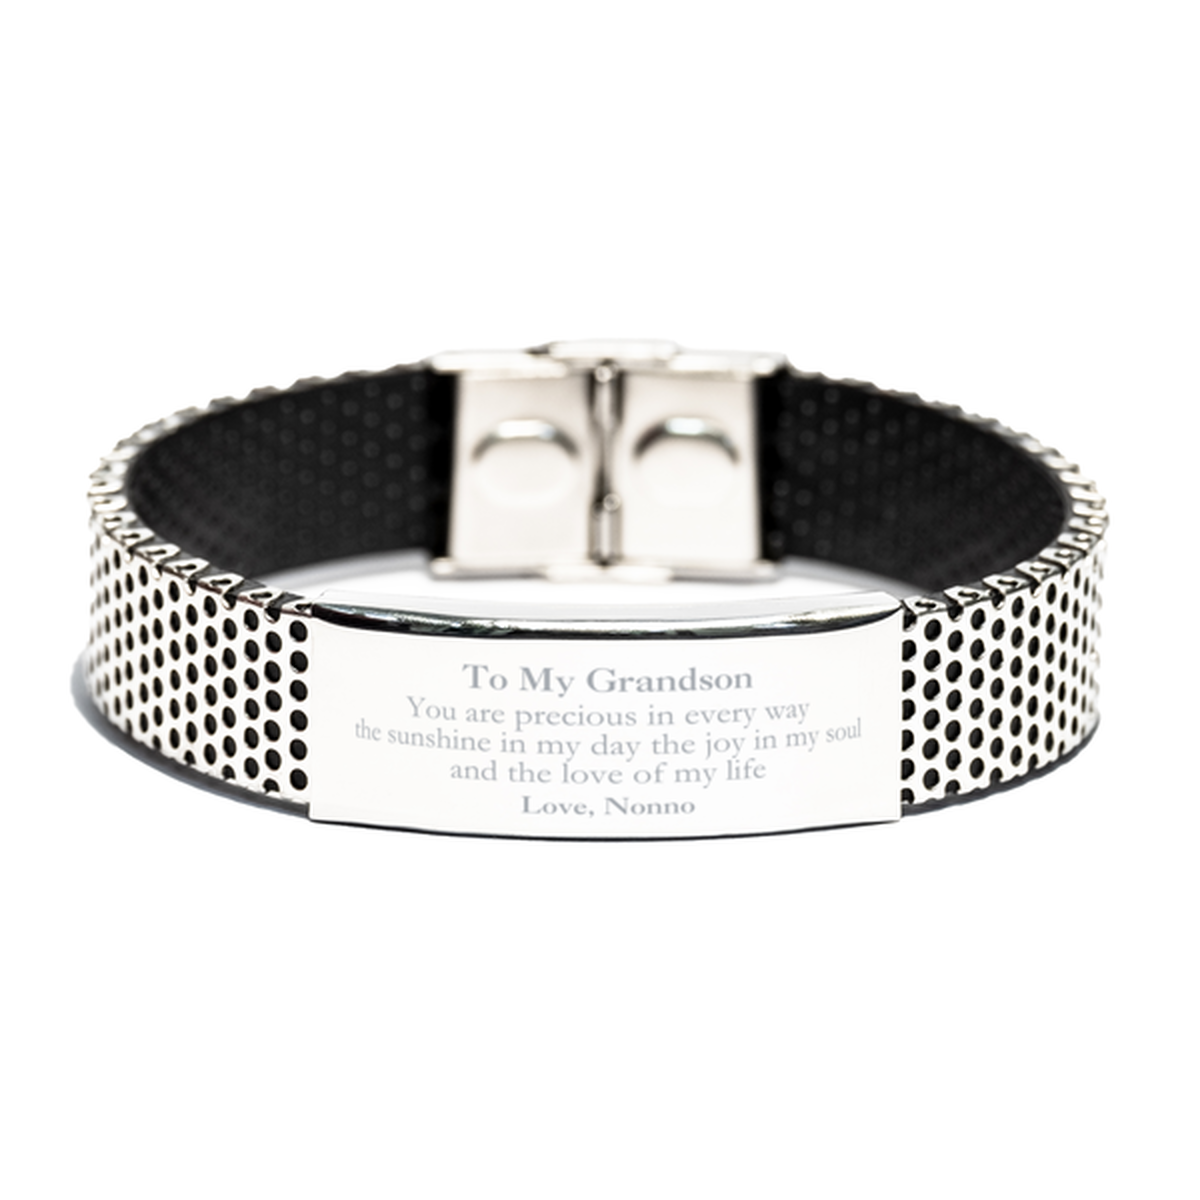 Graduation Gifts for Grandson Stainless Steel Bracelet Present from Nonno, Christmas Grandson Birthday Gifts Grandson You are precious in every way the sunshine in my day. Love, Nonno